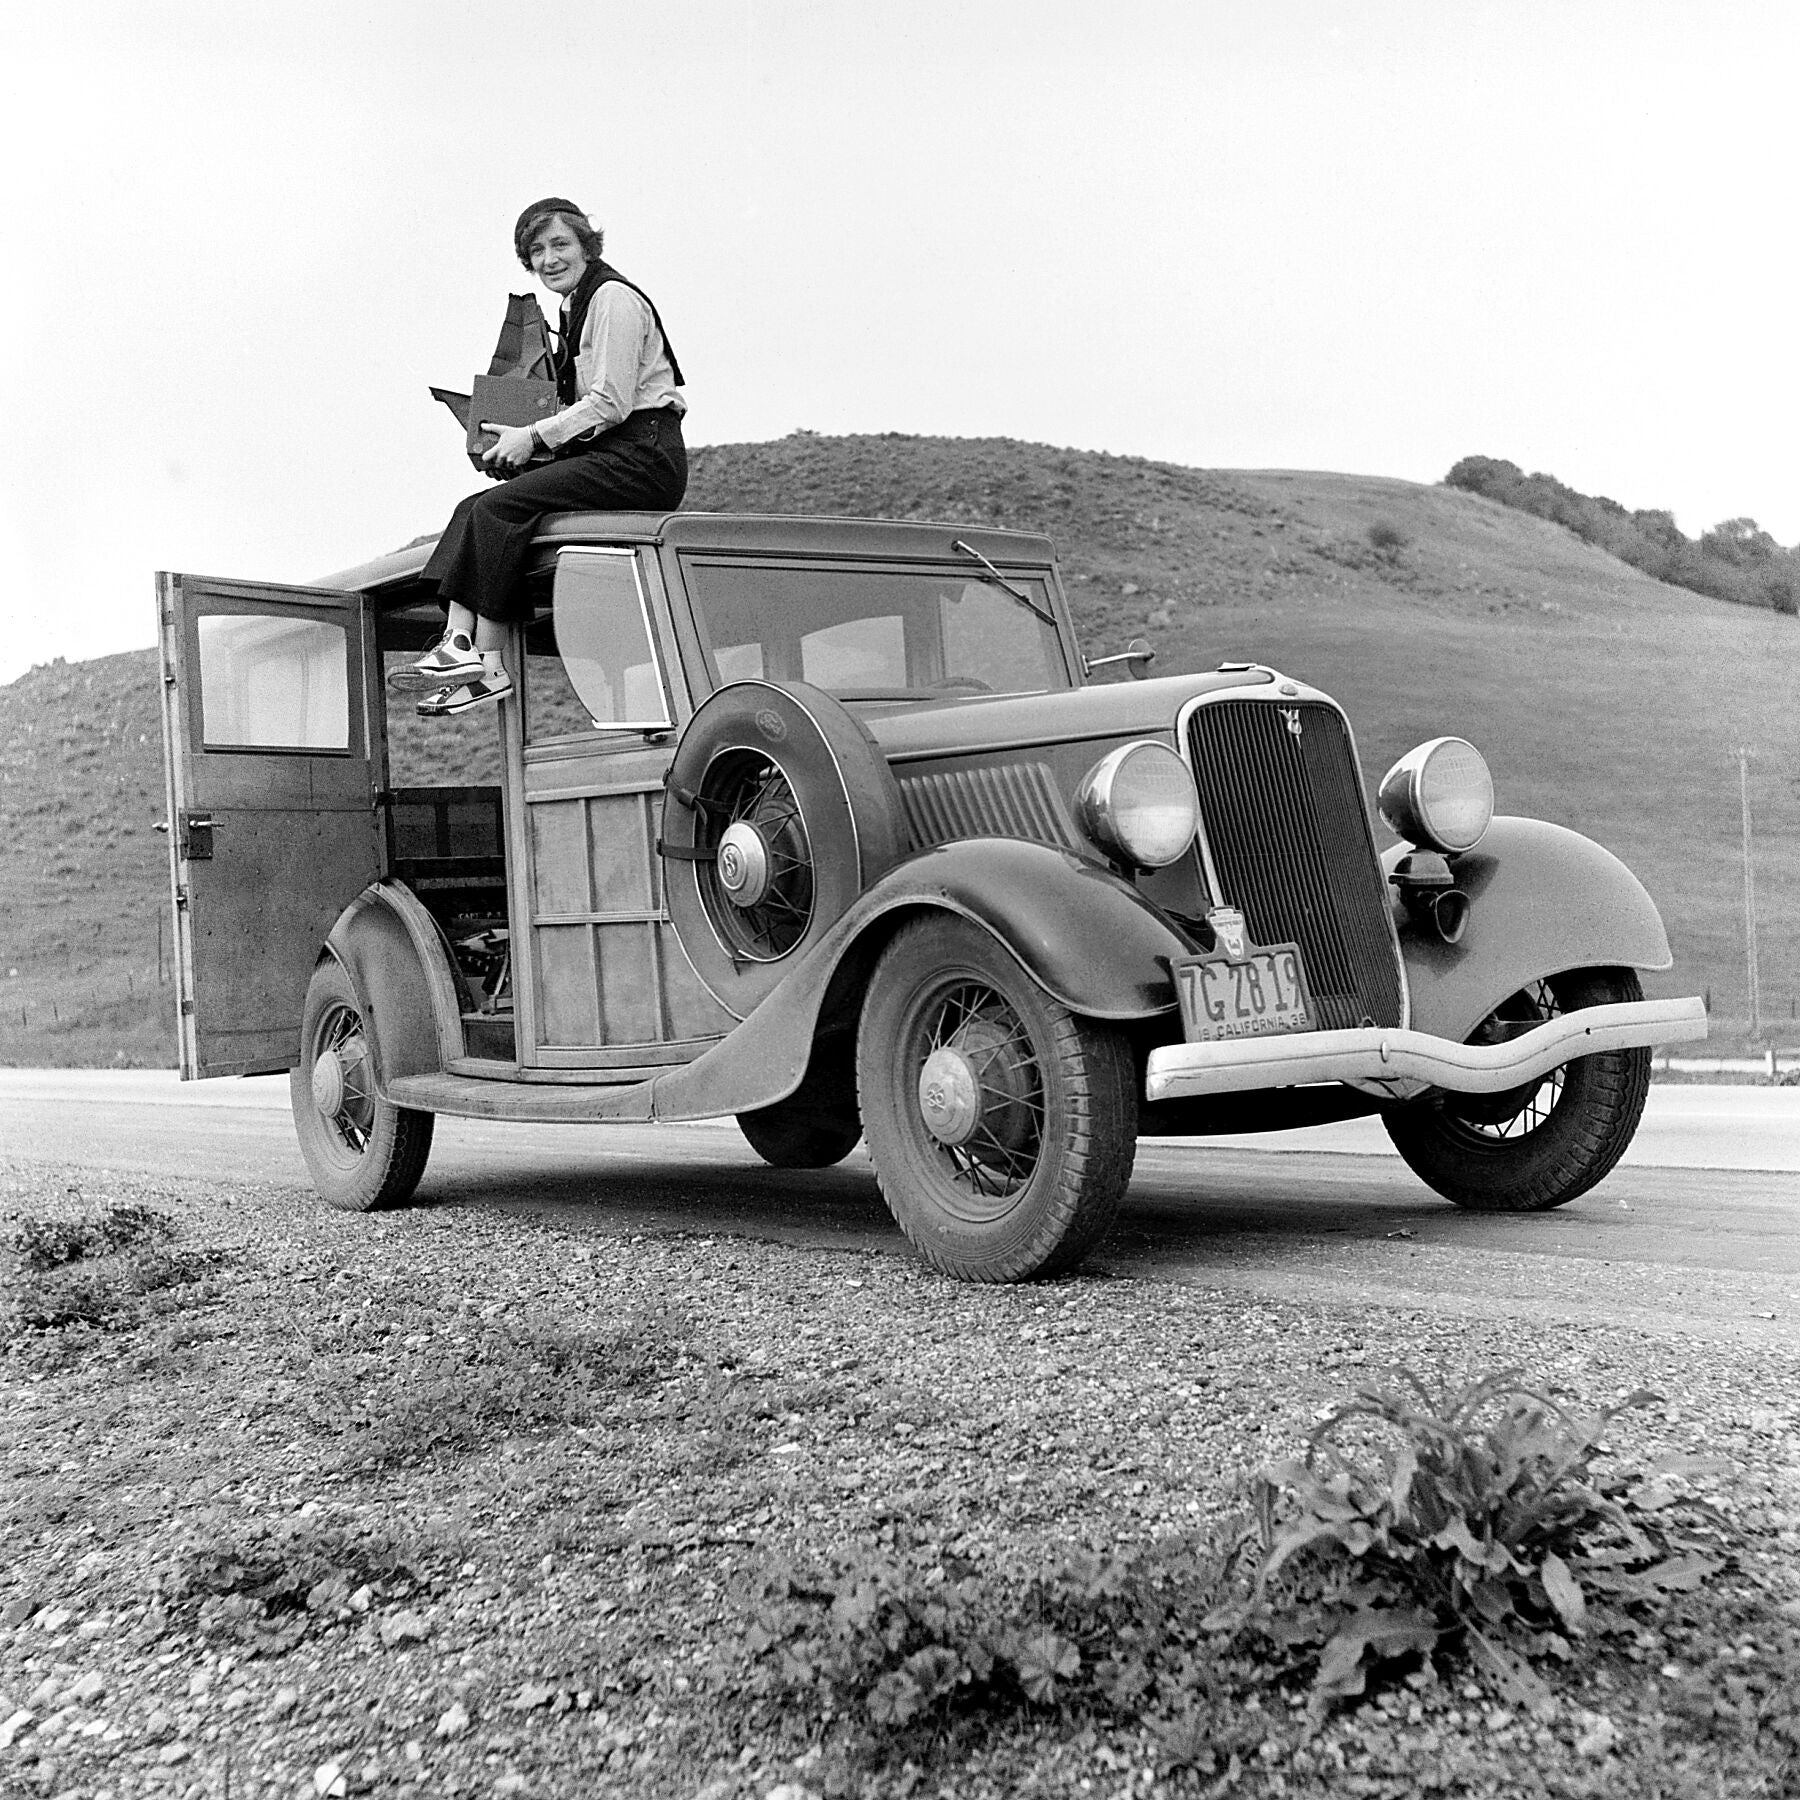 Dorothea Lange, Resettlement Administration photographer, in California. The car is a w-Ford Model V8 1936